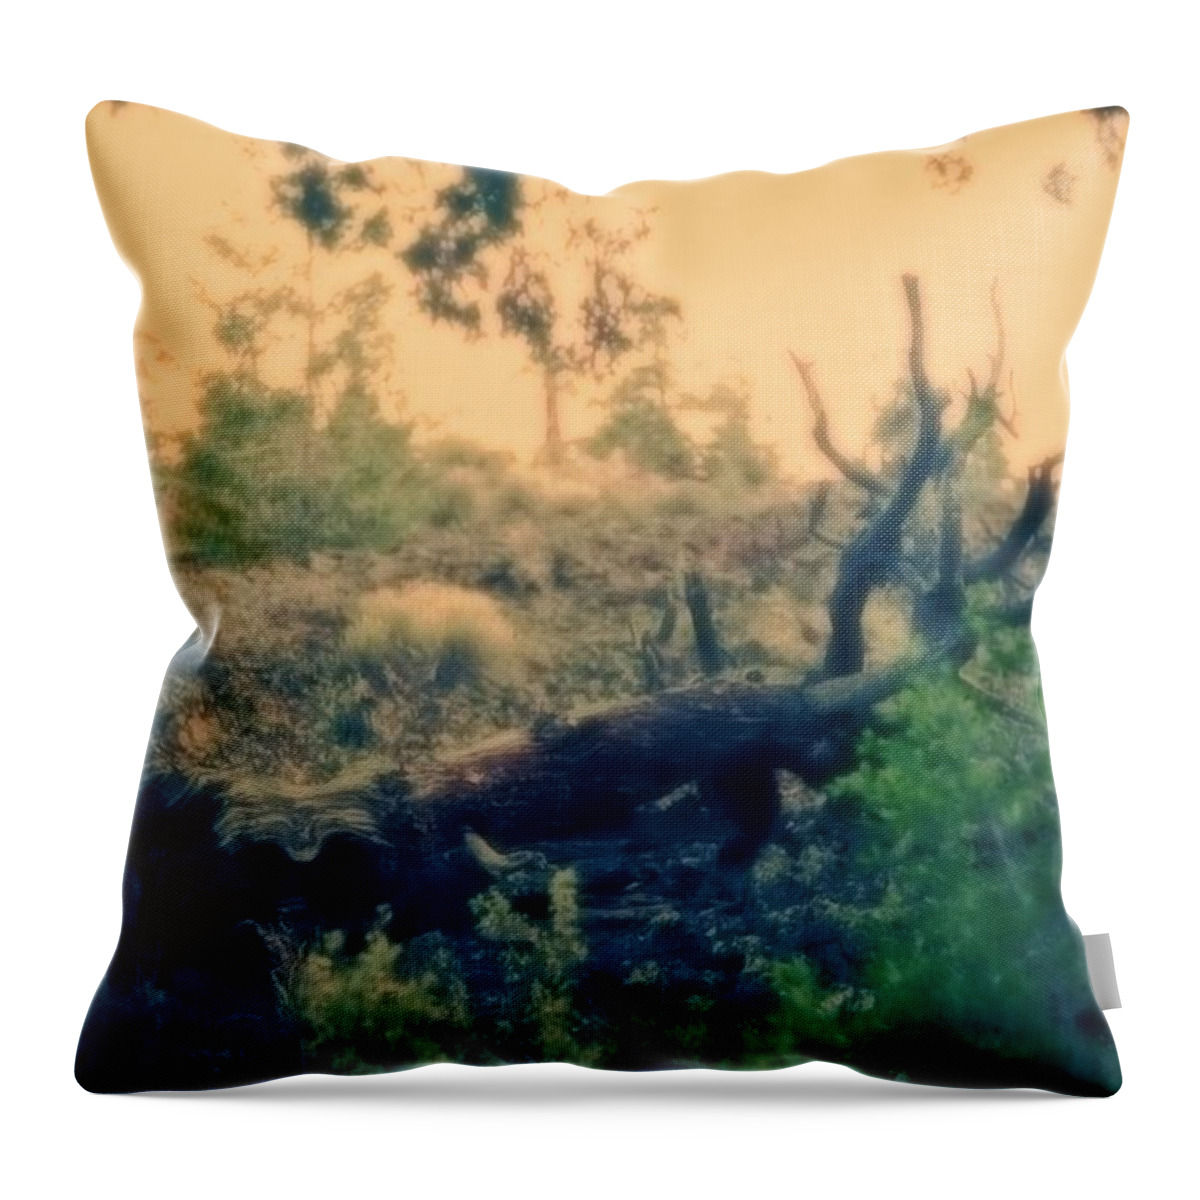 Bandera Throw Pillow featuring the photograph Mystery and Wonder by Carol Whaley Addassi